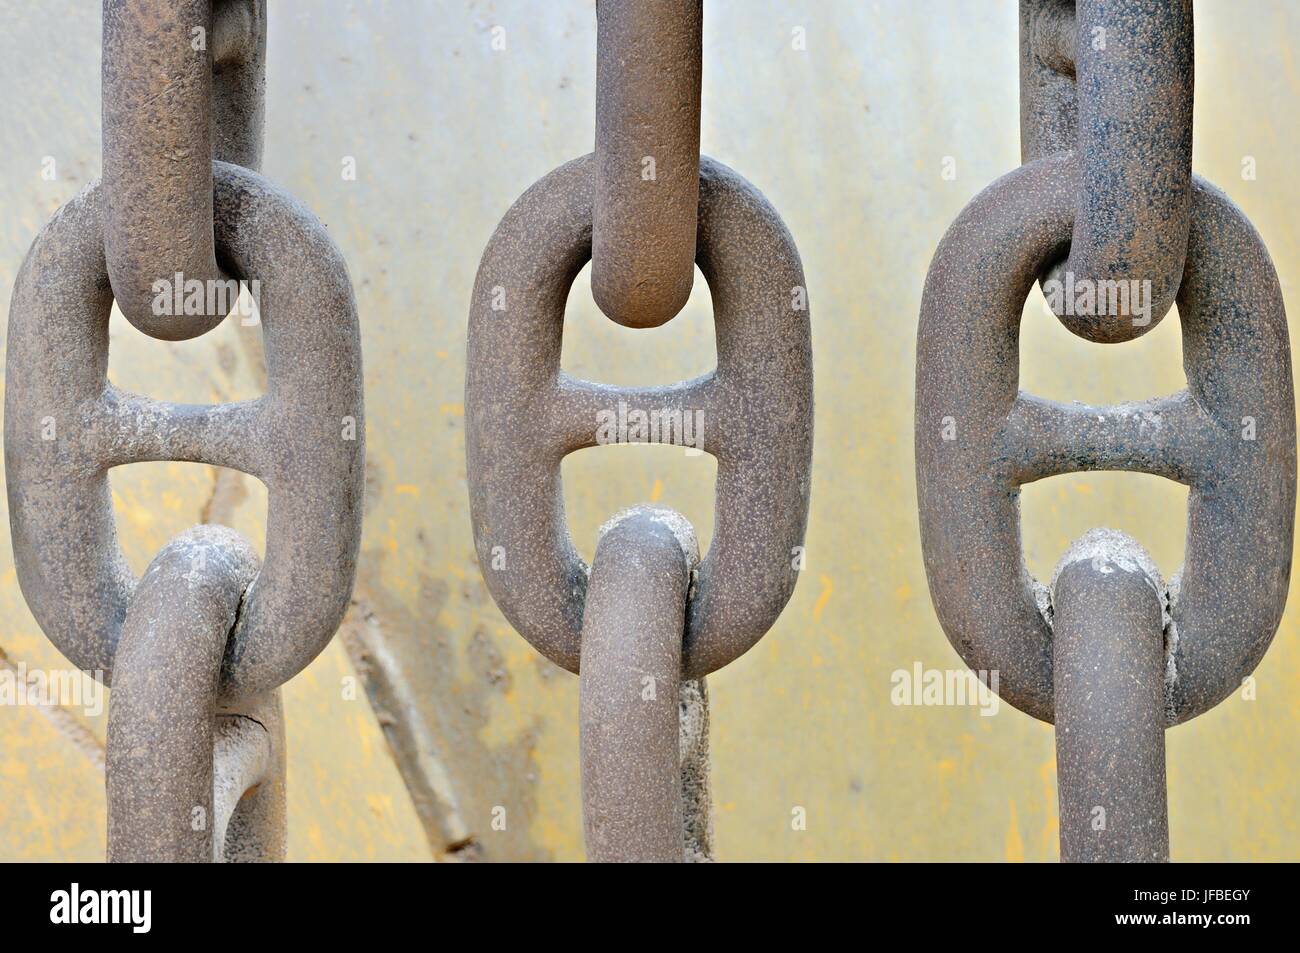 Chains next to each other Stock Photo